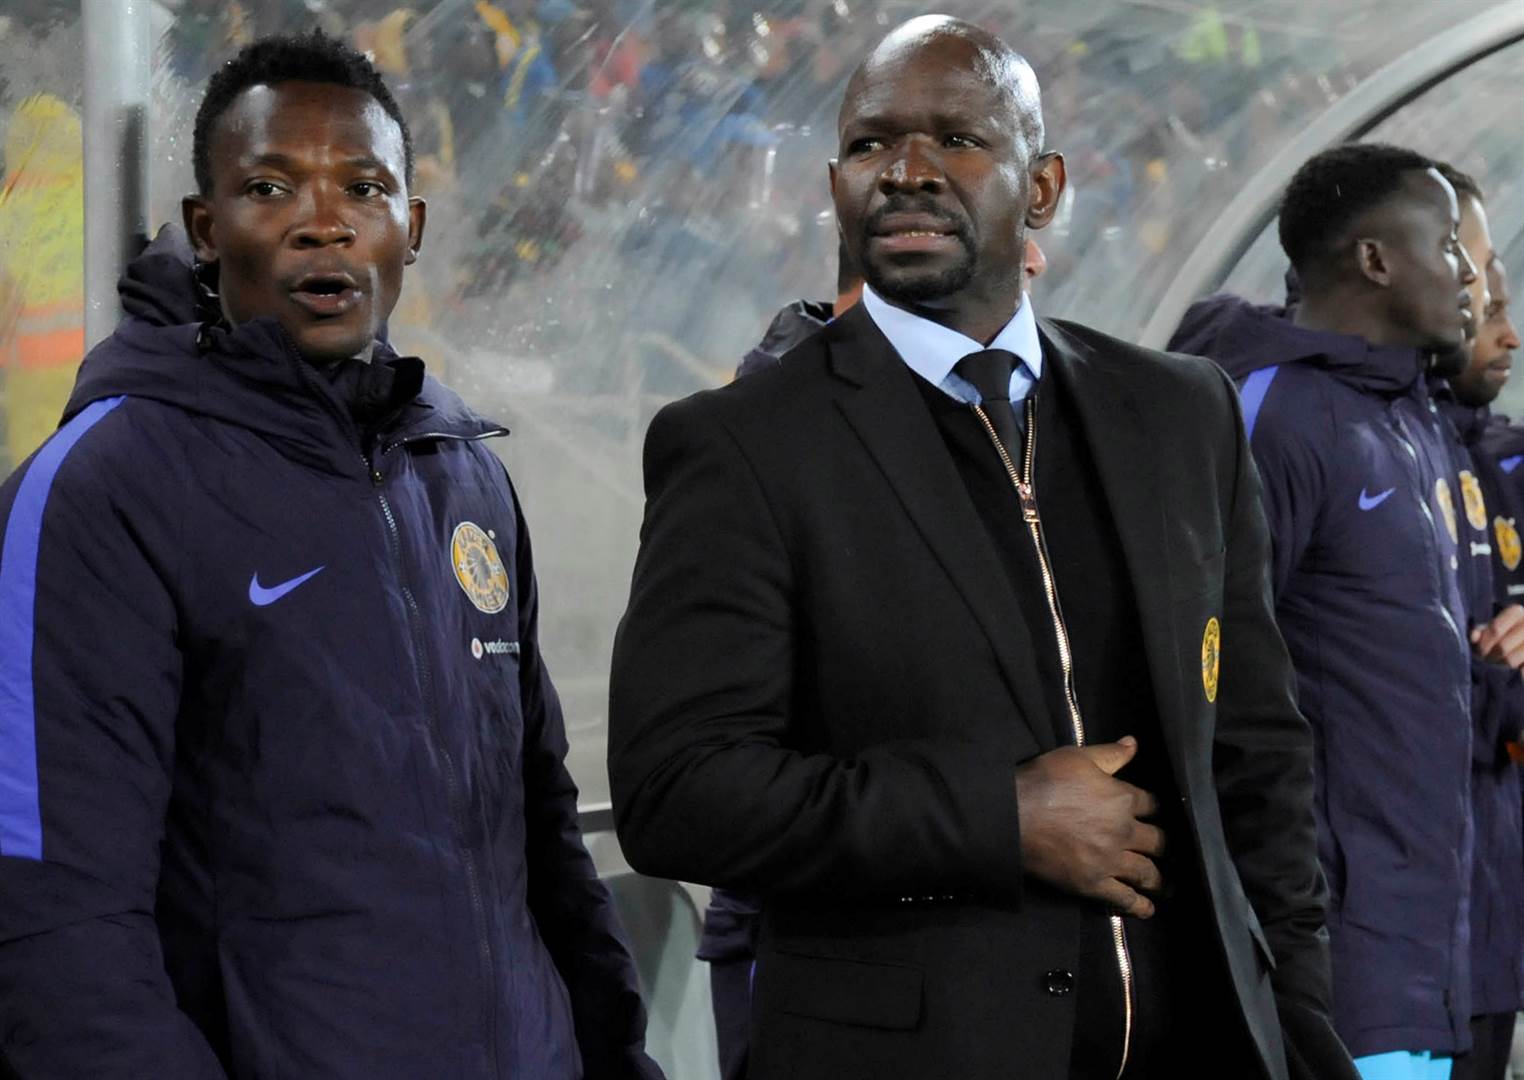 Yet another club has made coaching changes to their technical team with John Paintsil joining.